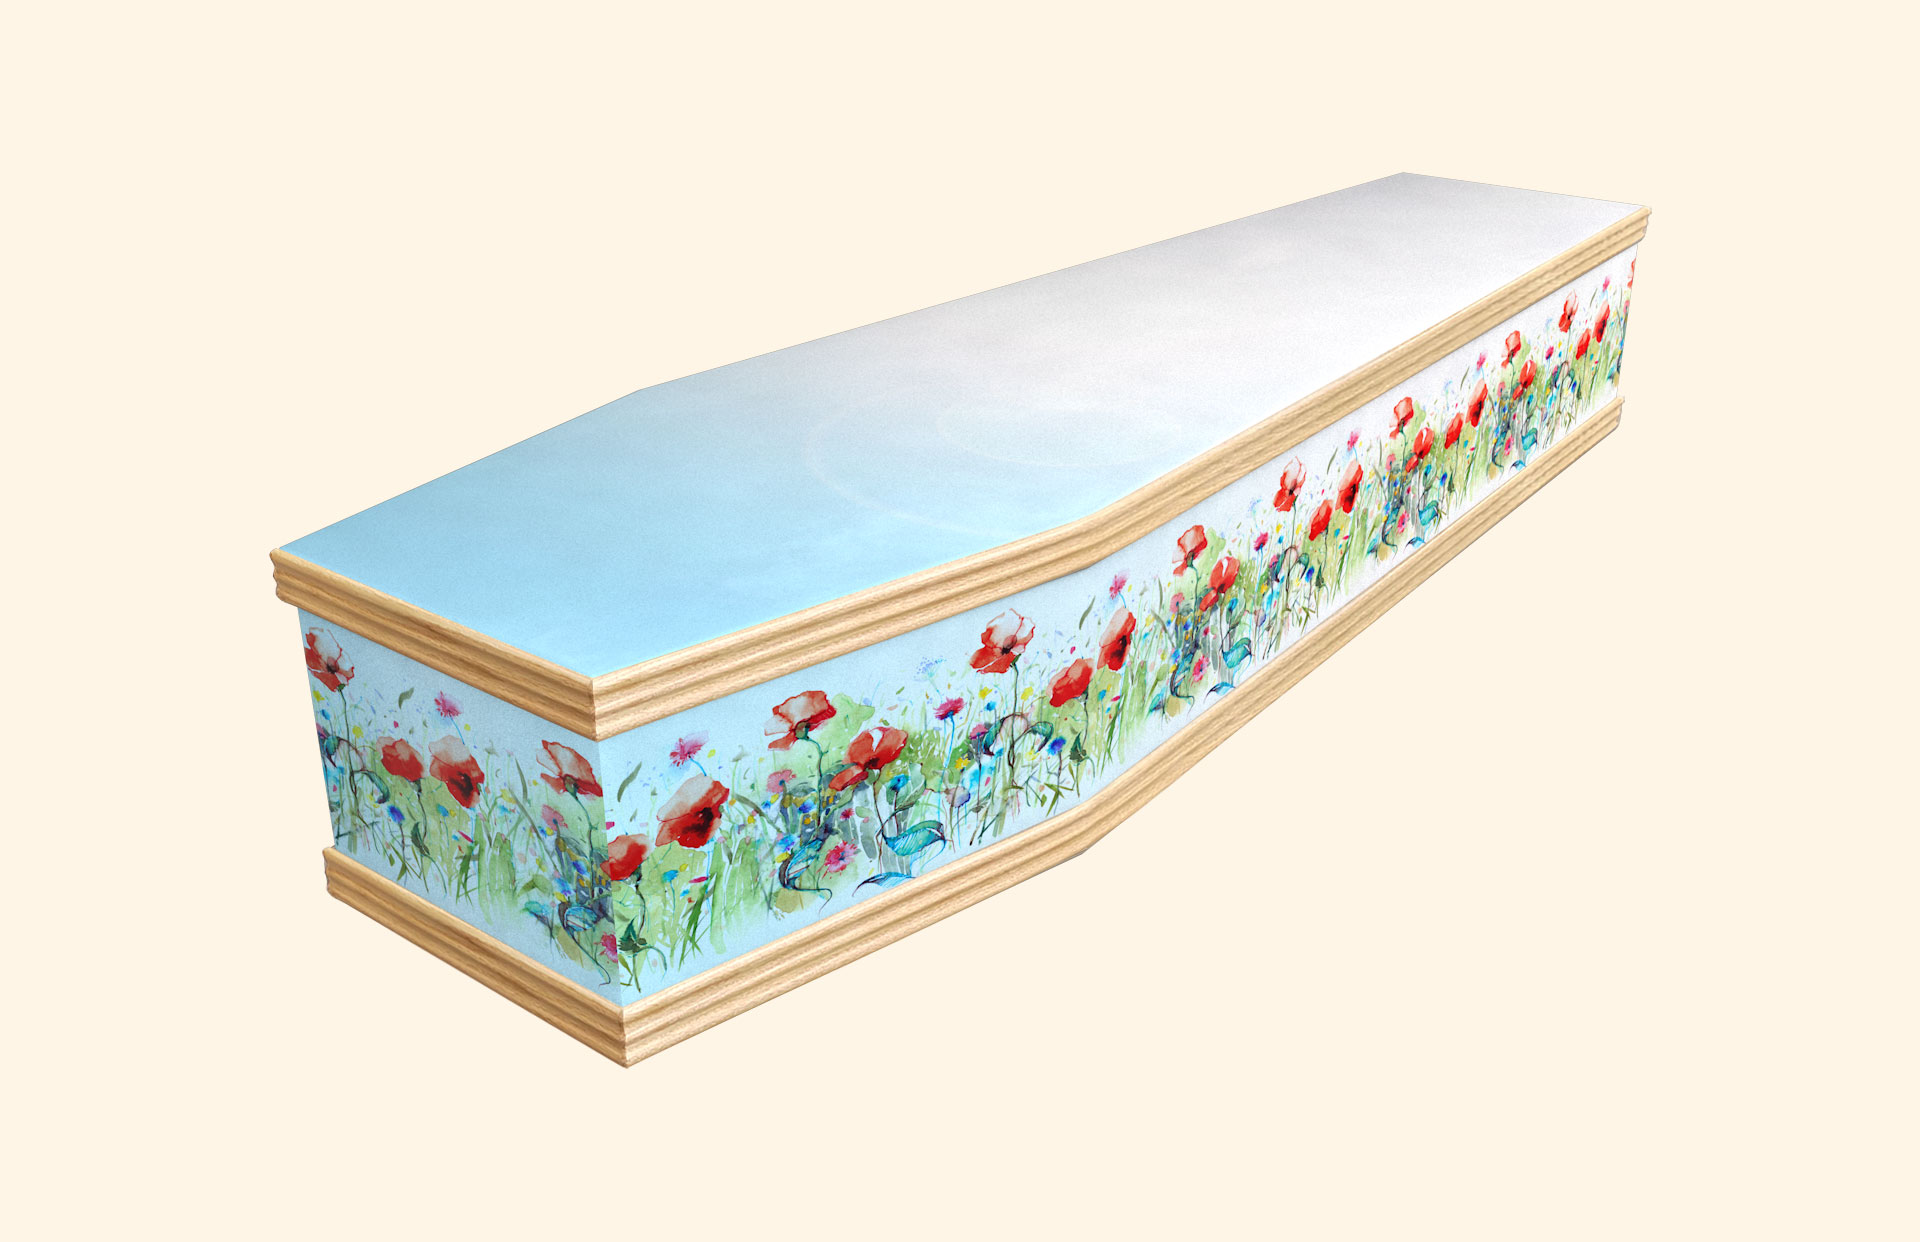 Watercolour Poppies in blue on a classic coffin